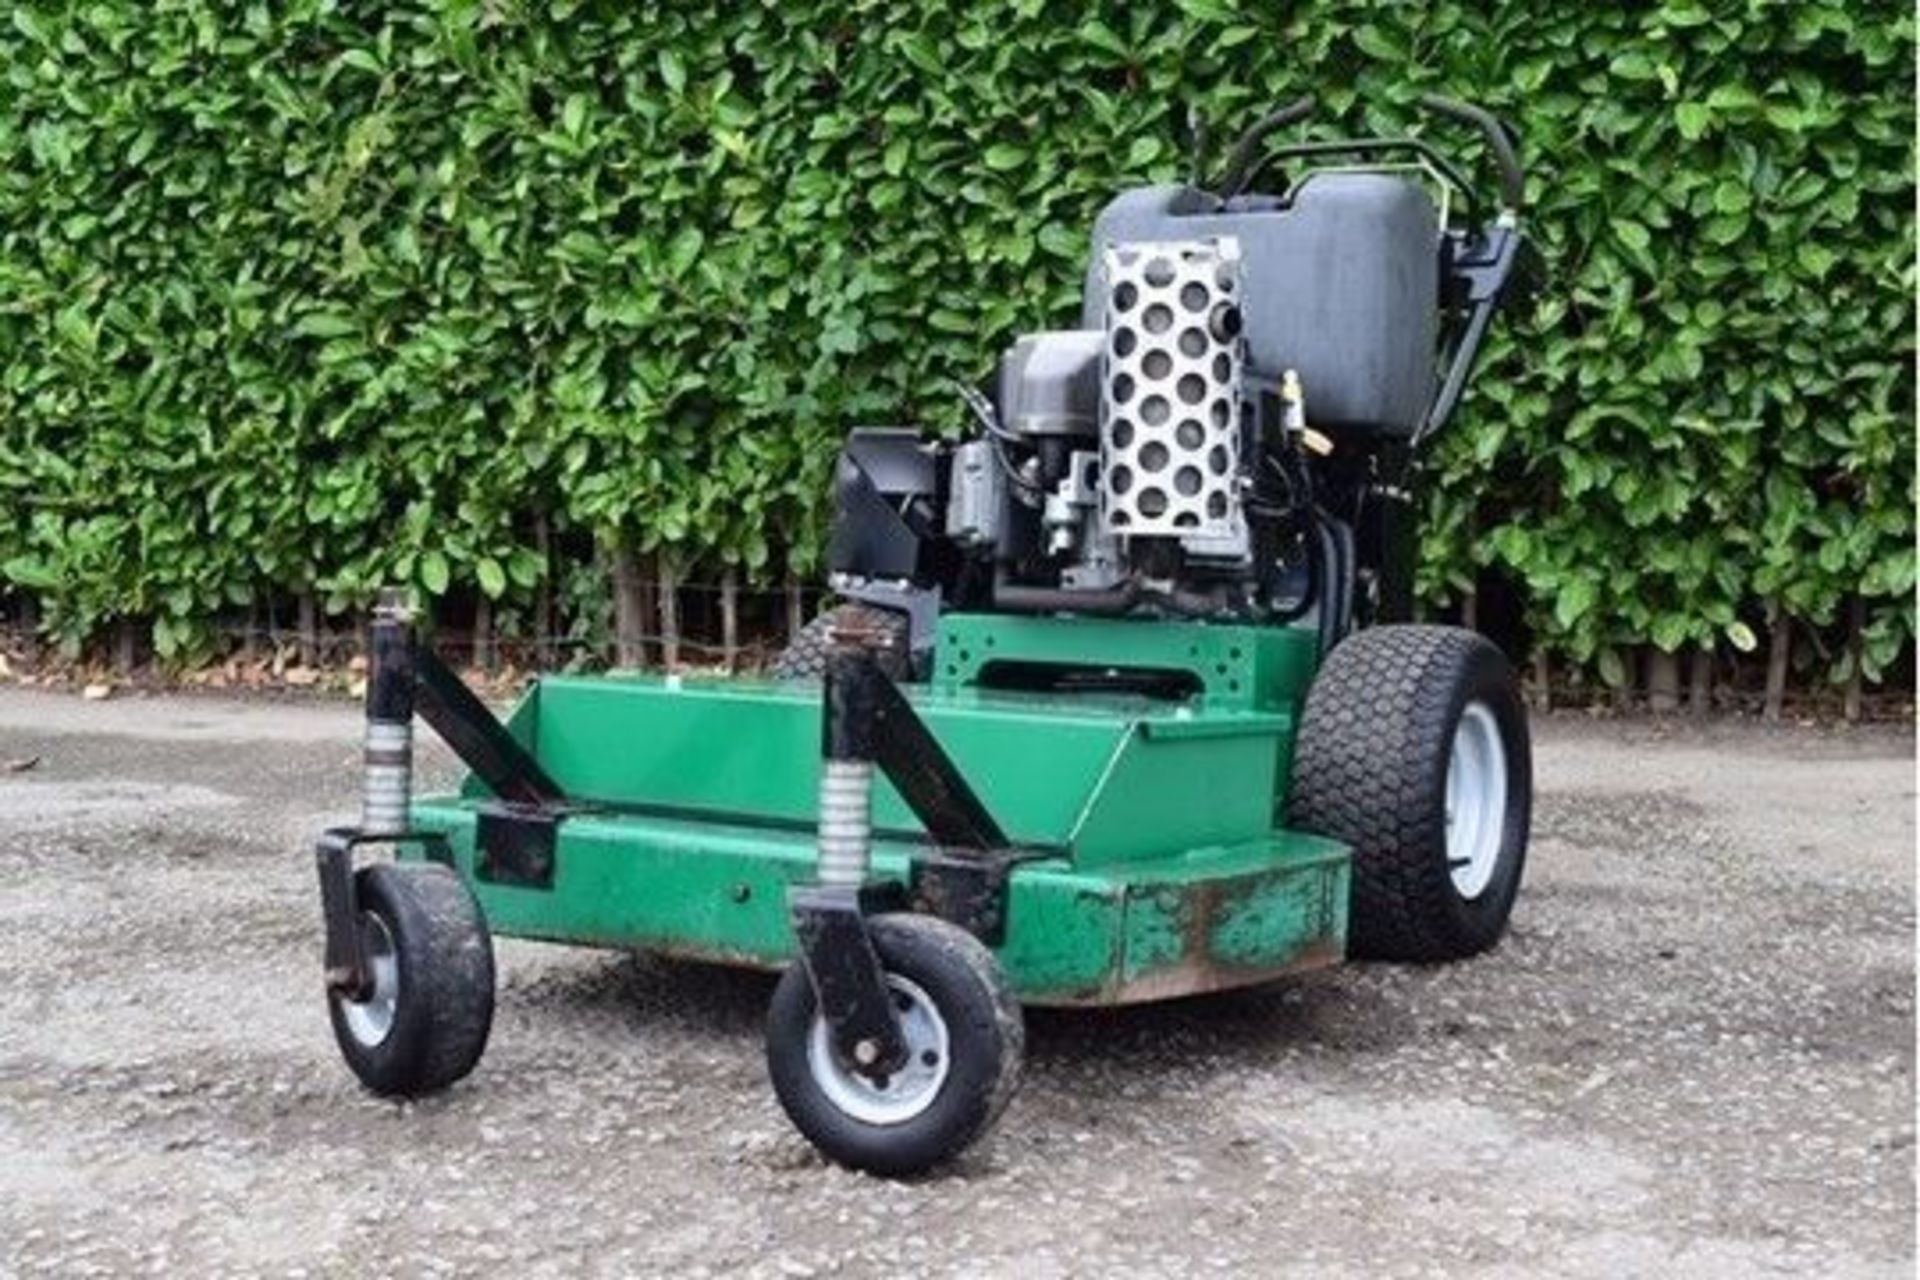 2011 Ransomes Pedestrian 36" Commercial Mower - Image 7 of 7